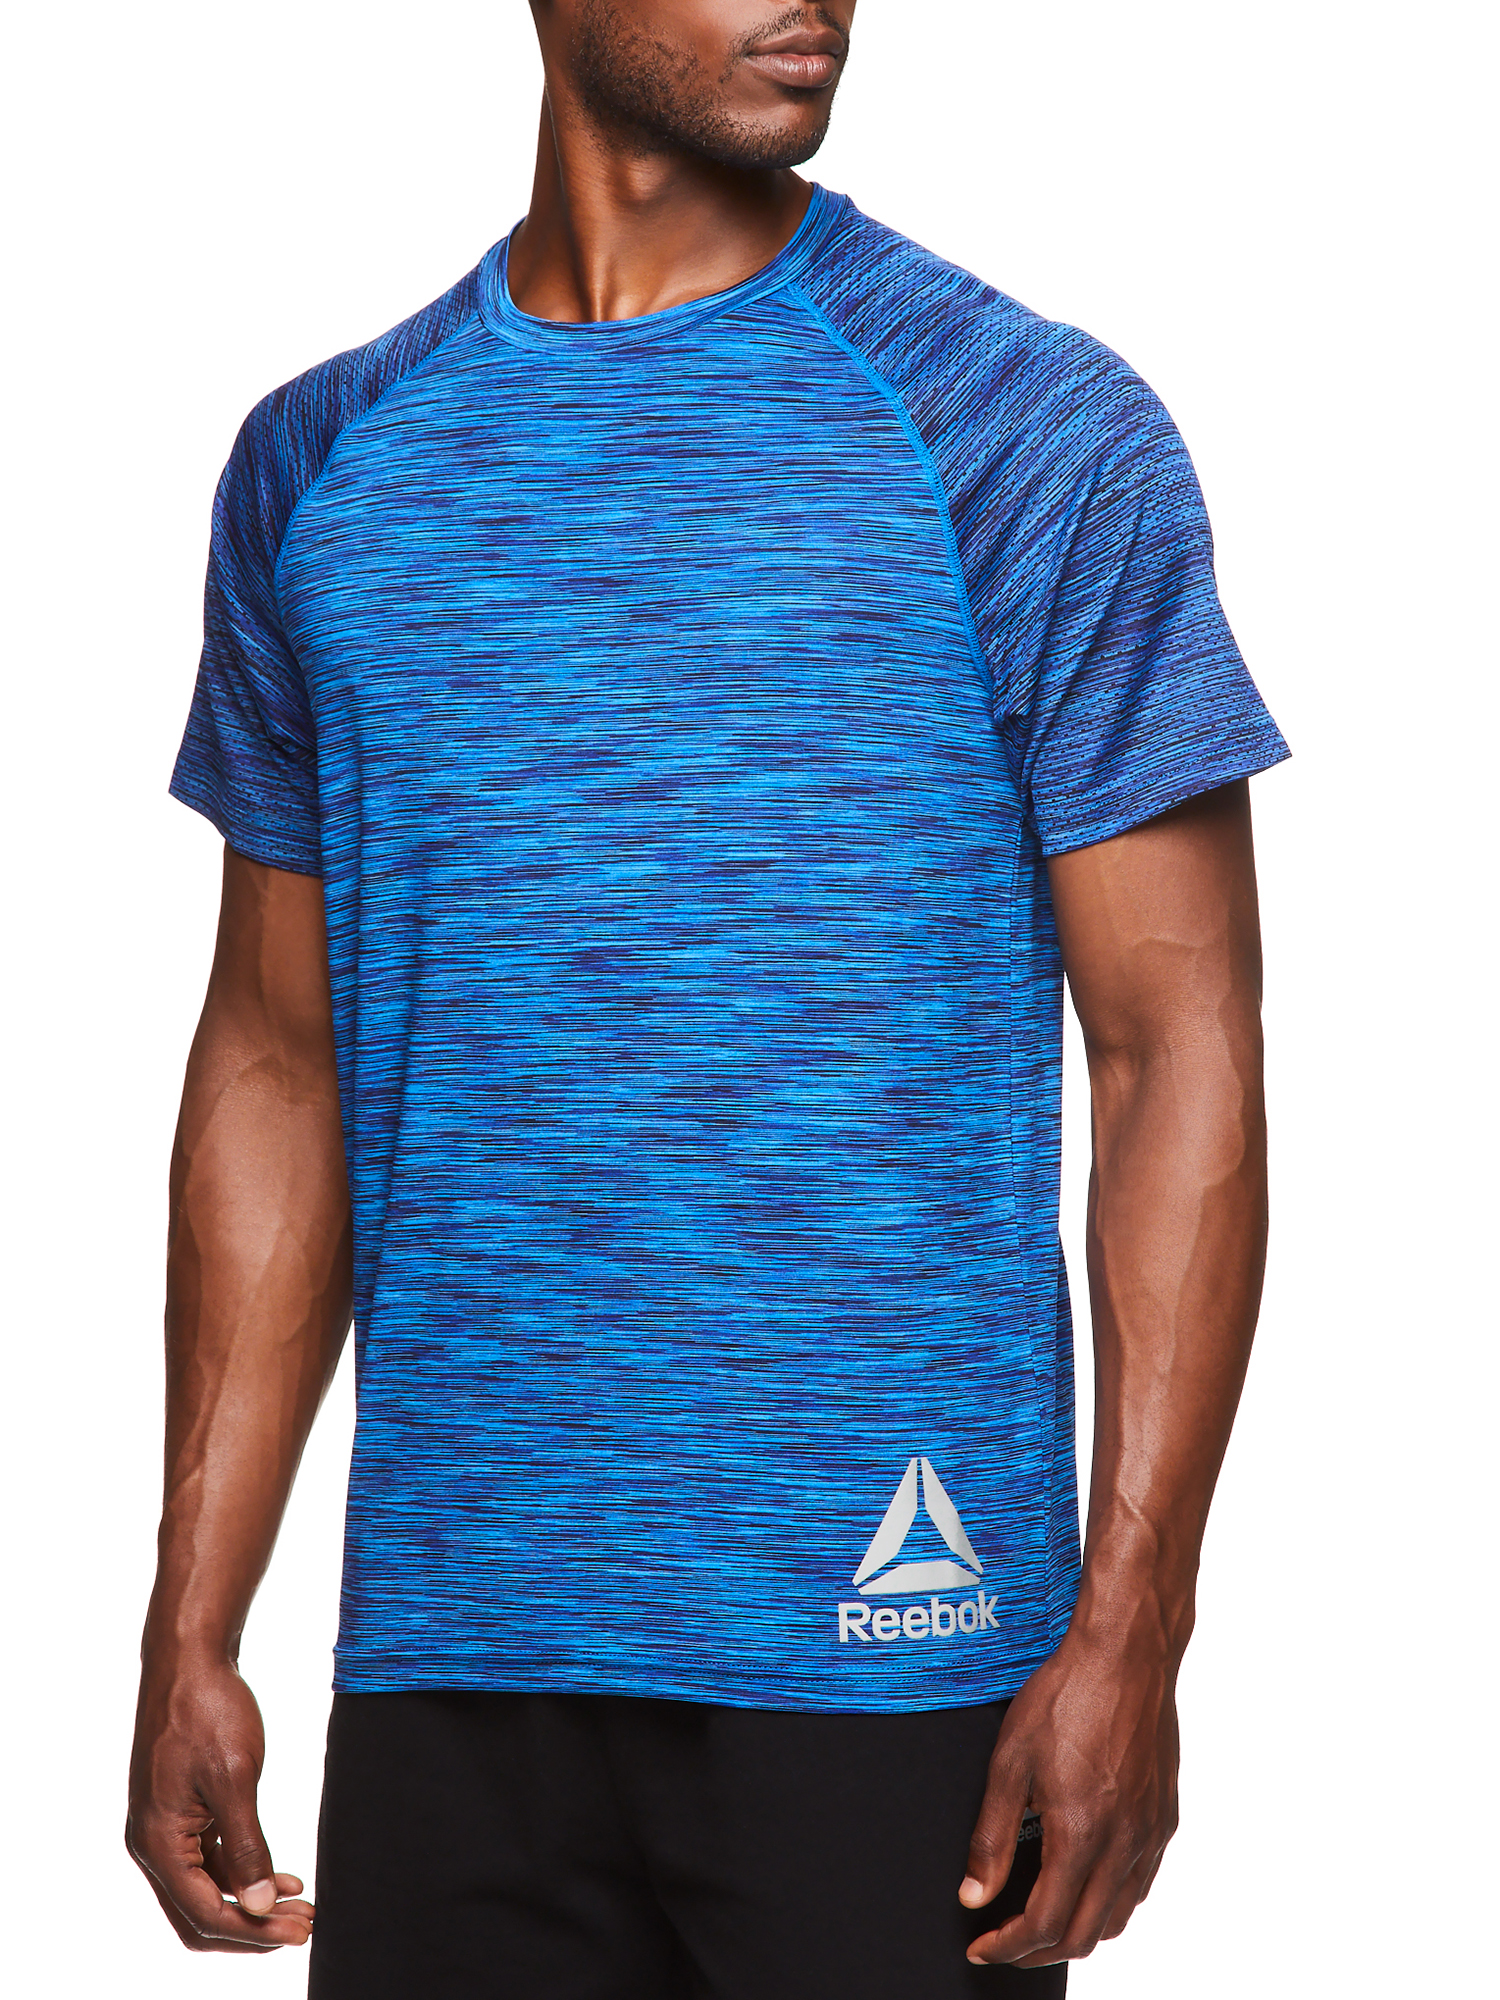 Reebok Men's and Big Men's Active Short Sleeve Tee with Mesh Sleeves, up to Size 3XL - image 4 of 4